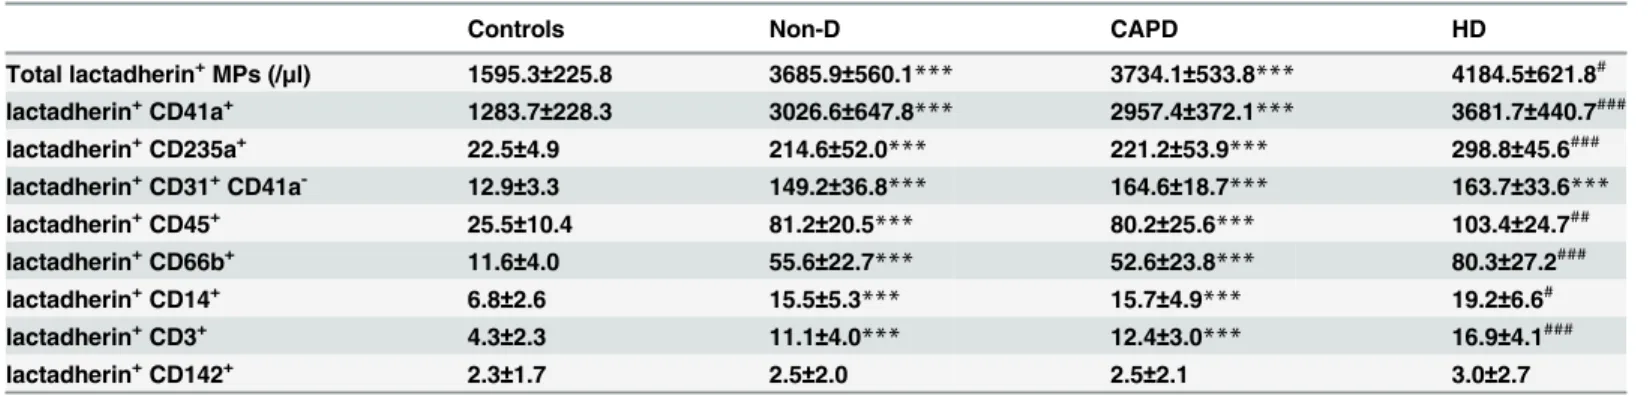 Table 2. Microparticles per microliter of plasma in Non-D, CAPD, HD and controls.